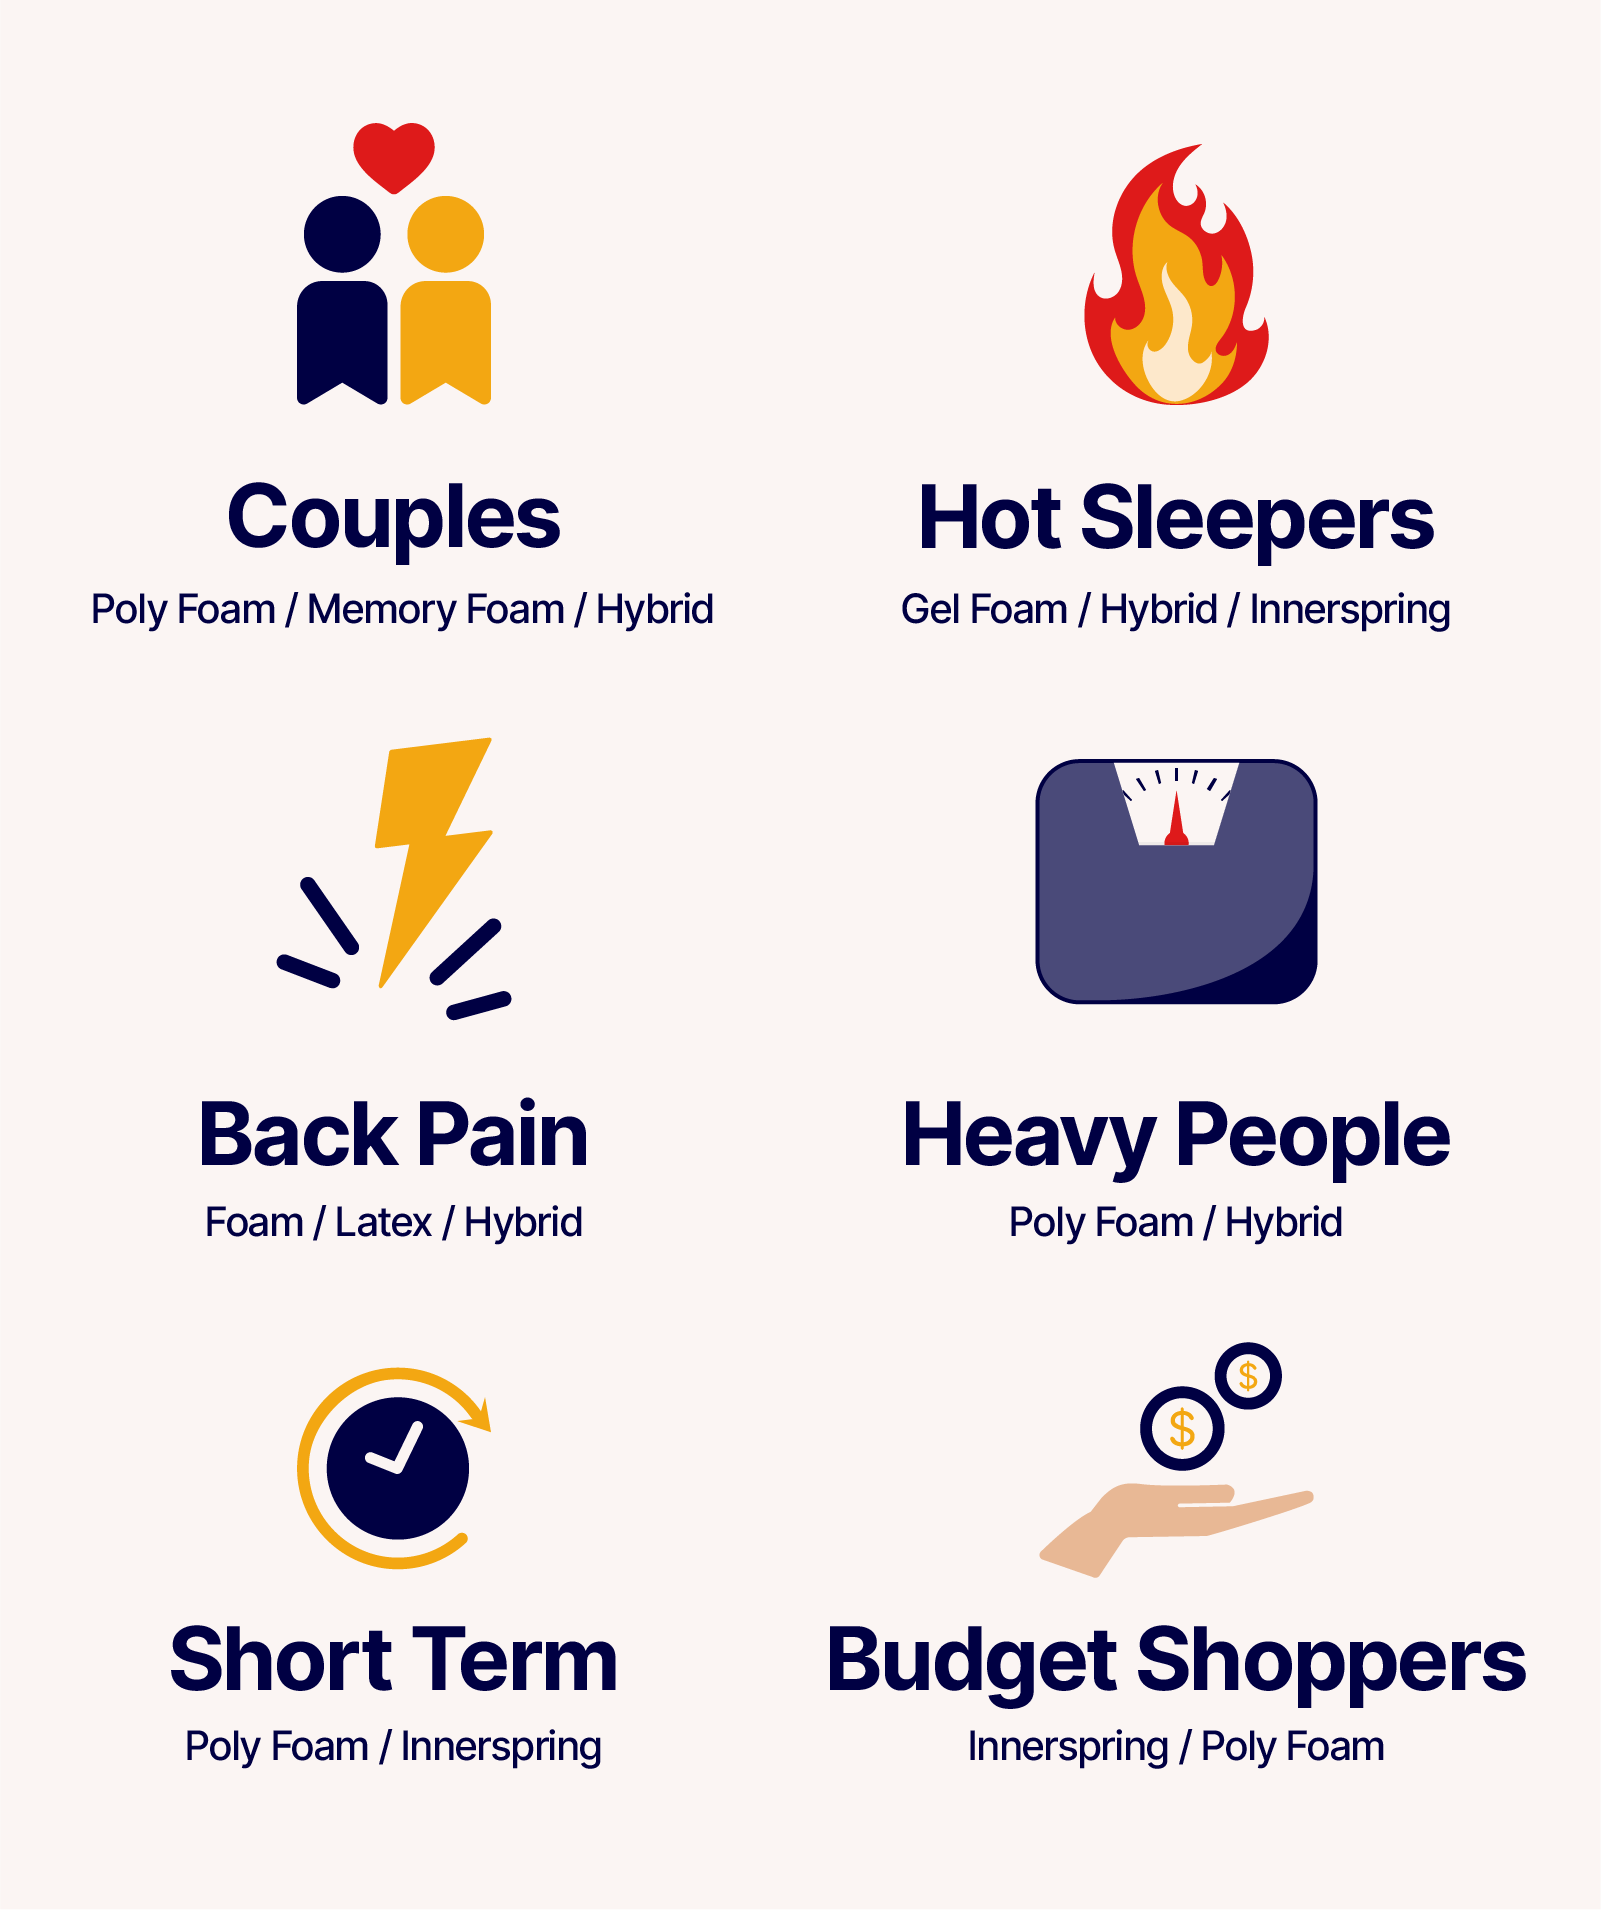 infographic with icons to show what type of mattress is best for each group: couples (poly foam, memory foam, hybrid), hot sleepers (gel foam, hybrid, innerspring), back pain (foam, latex, hybrid), heavy people (poly foam, hybrid), short term (poly foam, innerspring), and budget shoppers (innerspring, poly foam)